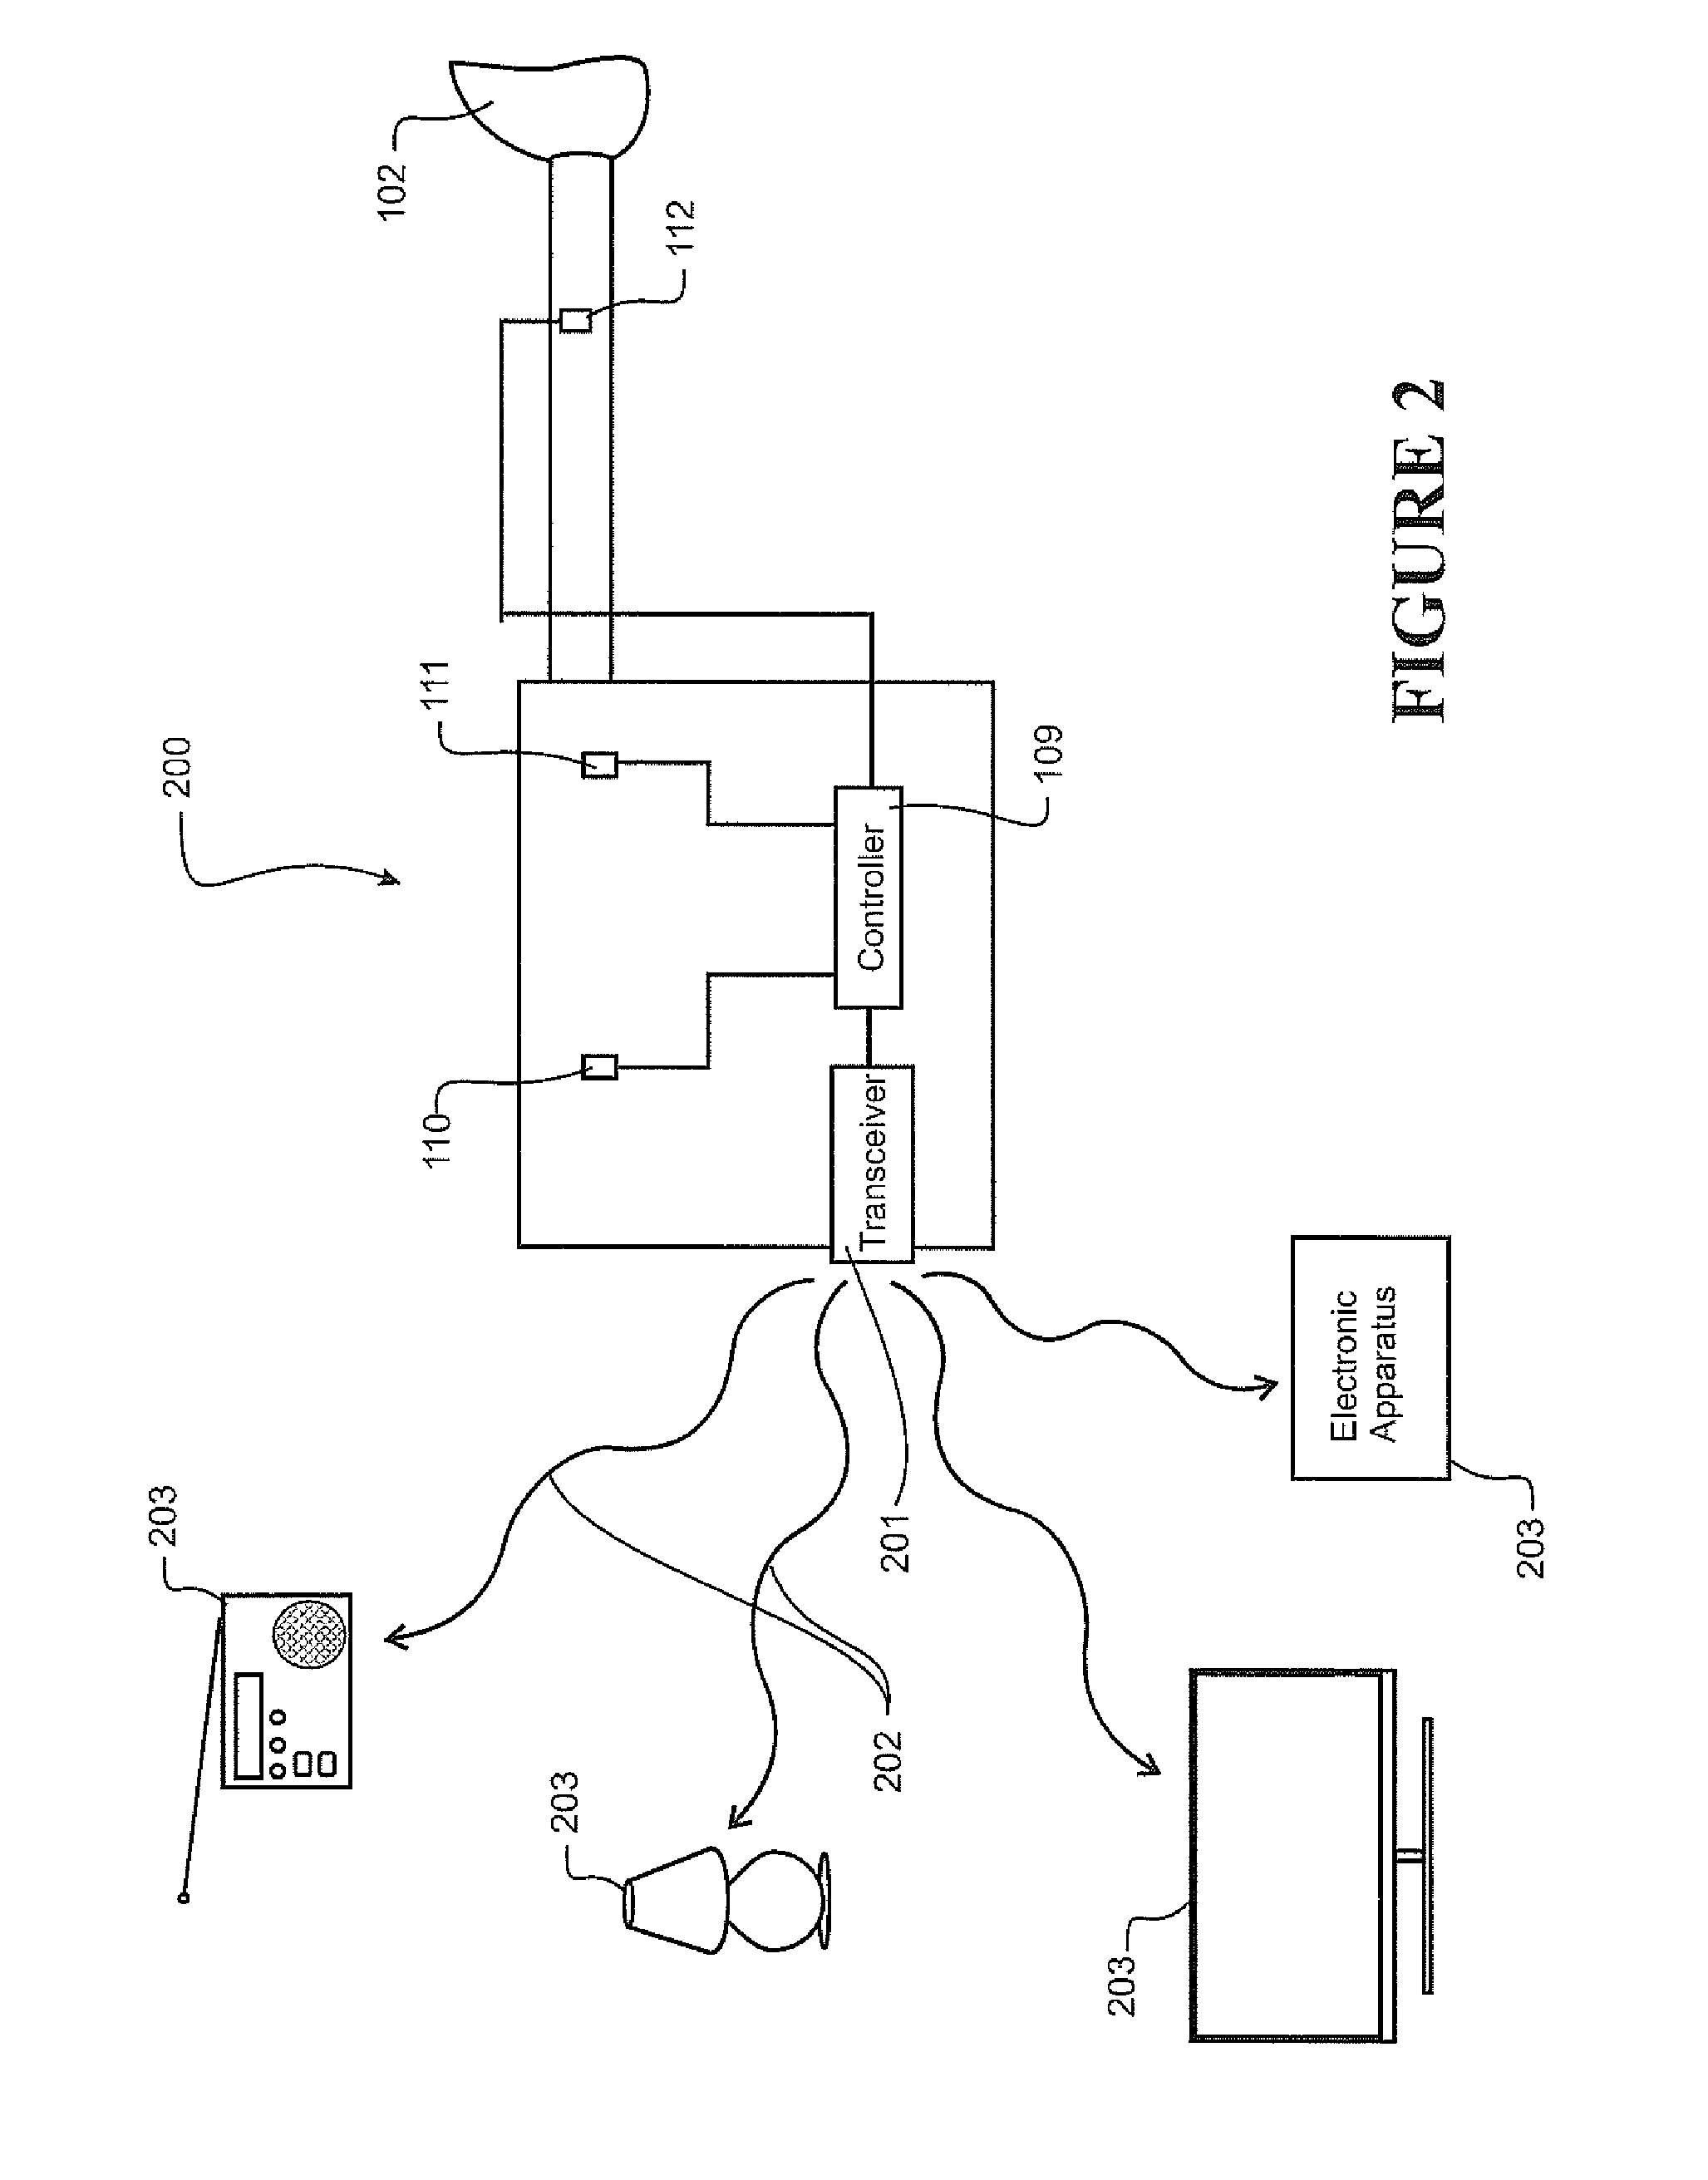 Electronic apparatus control using a breathing assistance apparatus